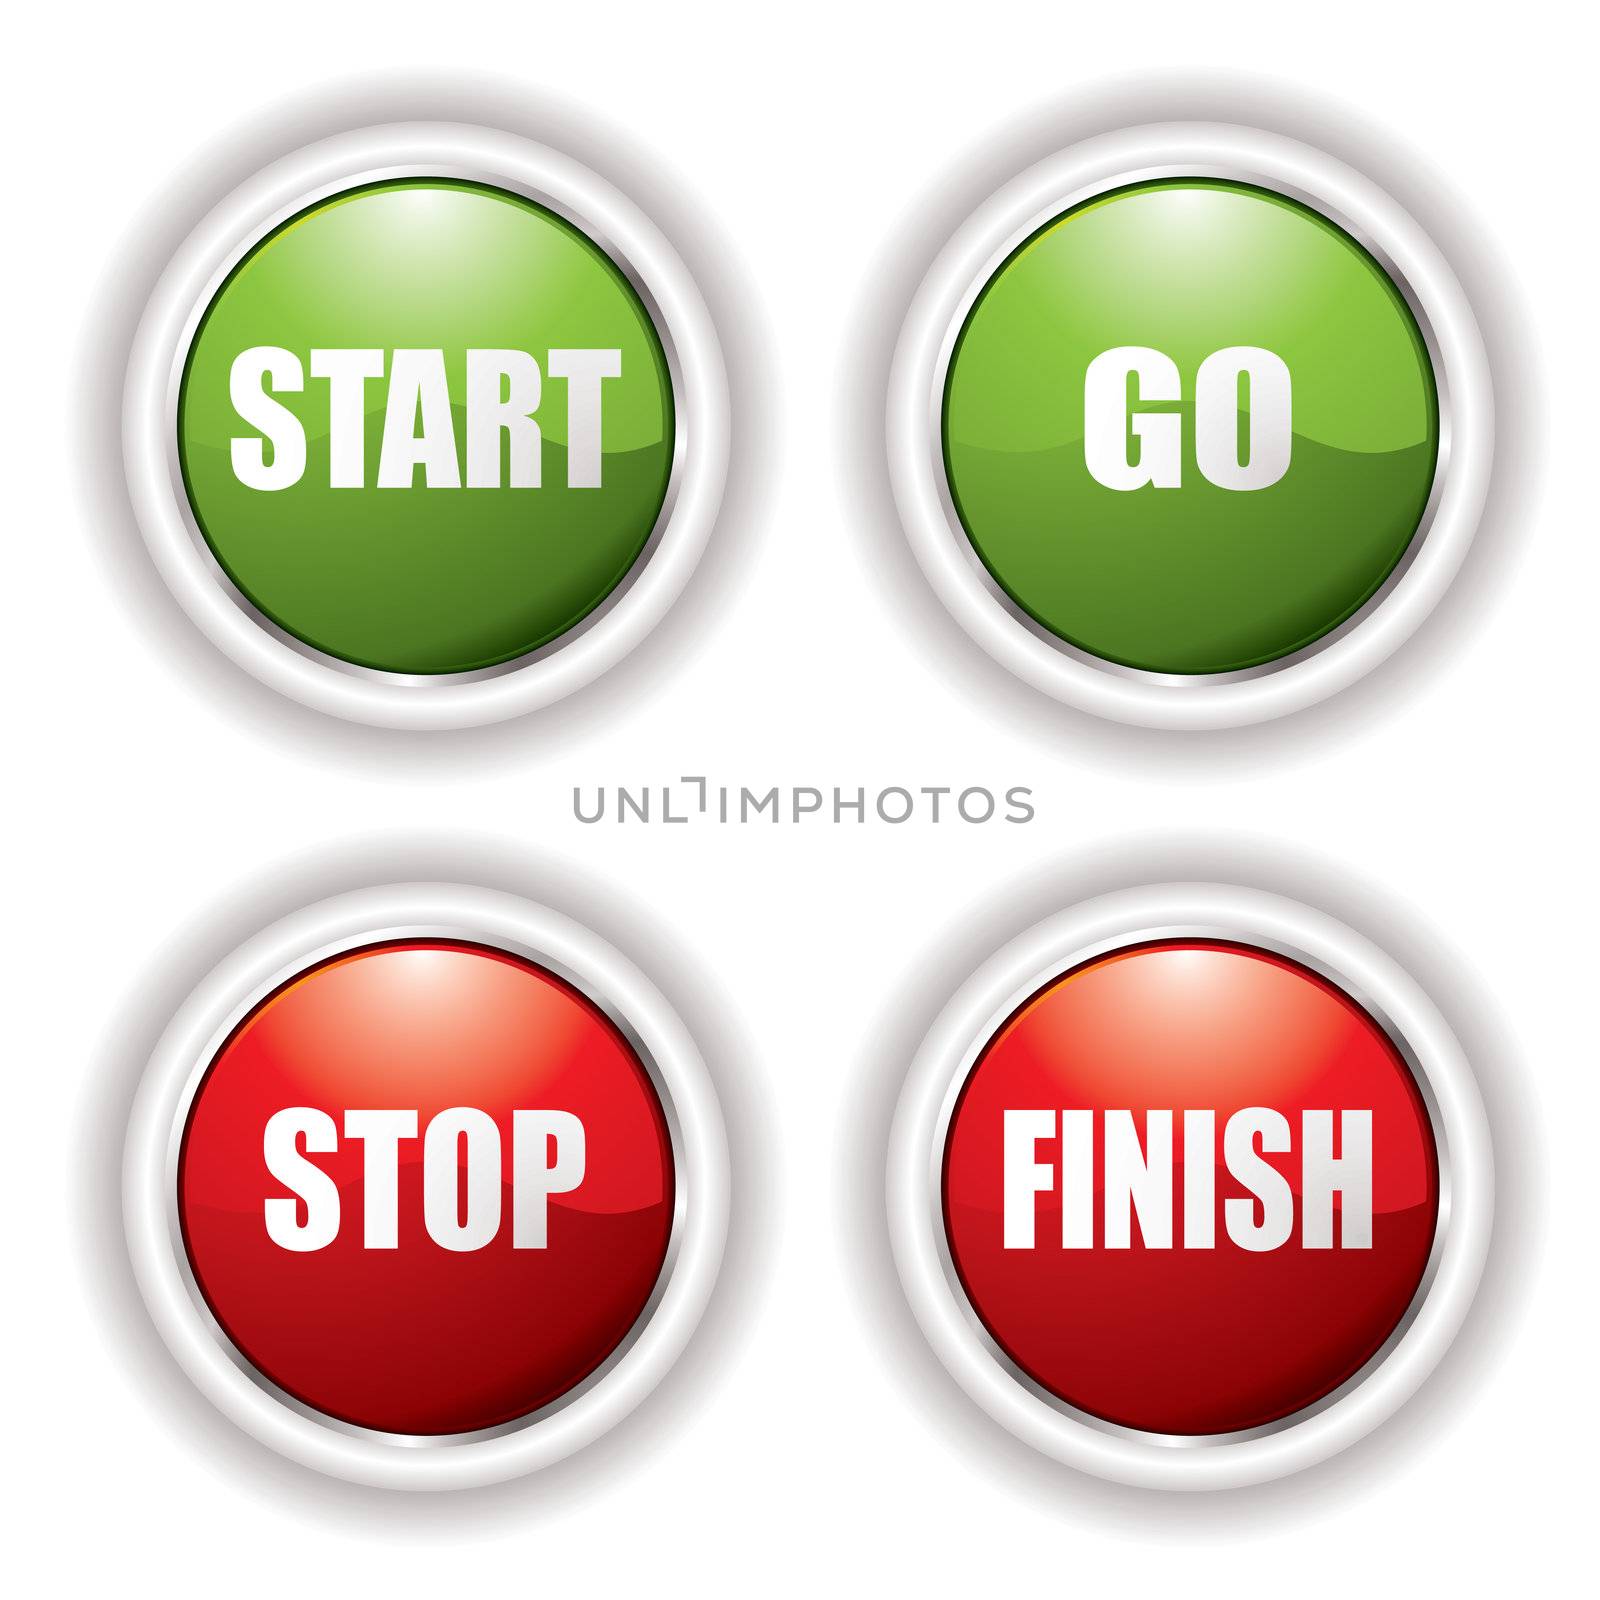 Stop start buttons in red and green with silver bevel